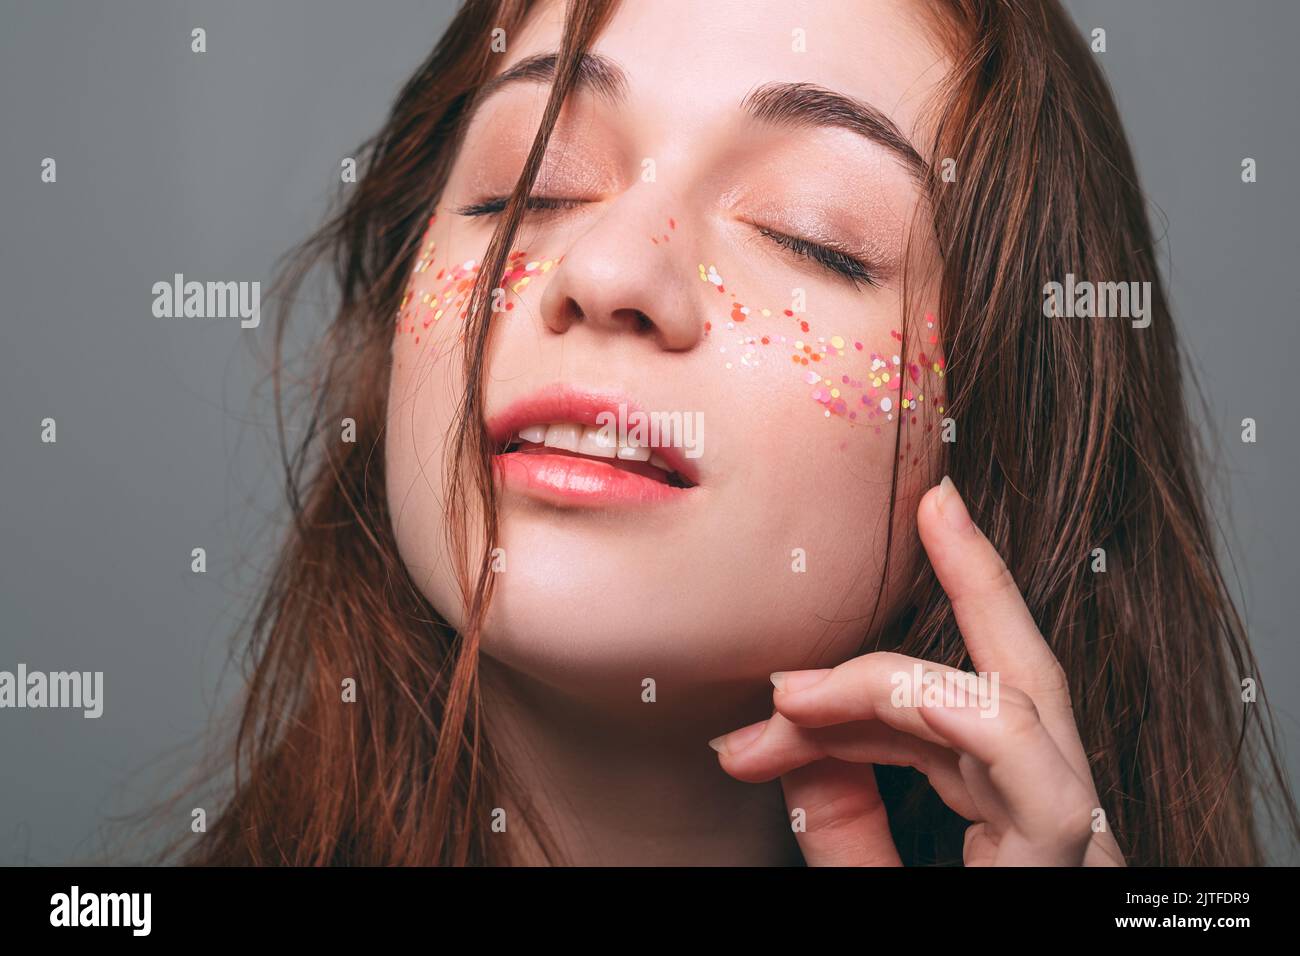 young beautiful female glitter makeup eyes closed Stock Photo